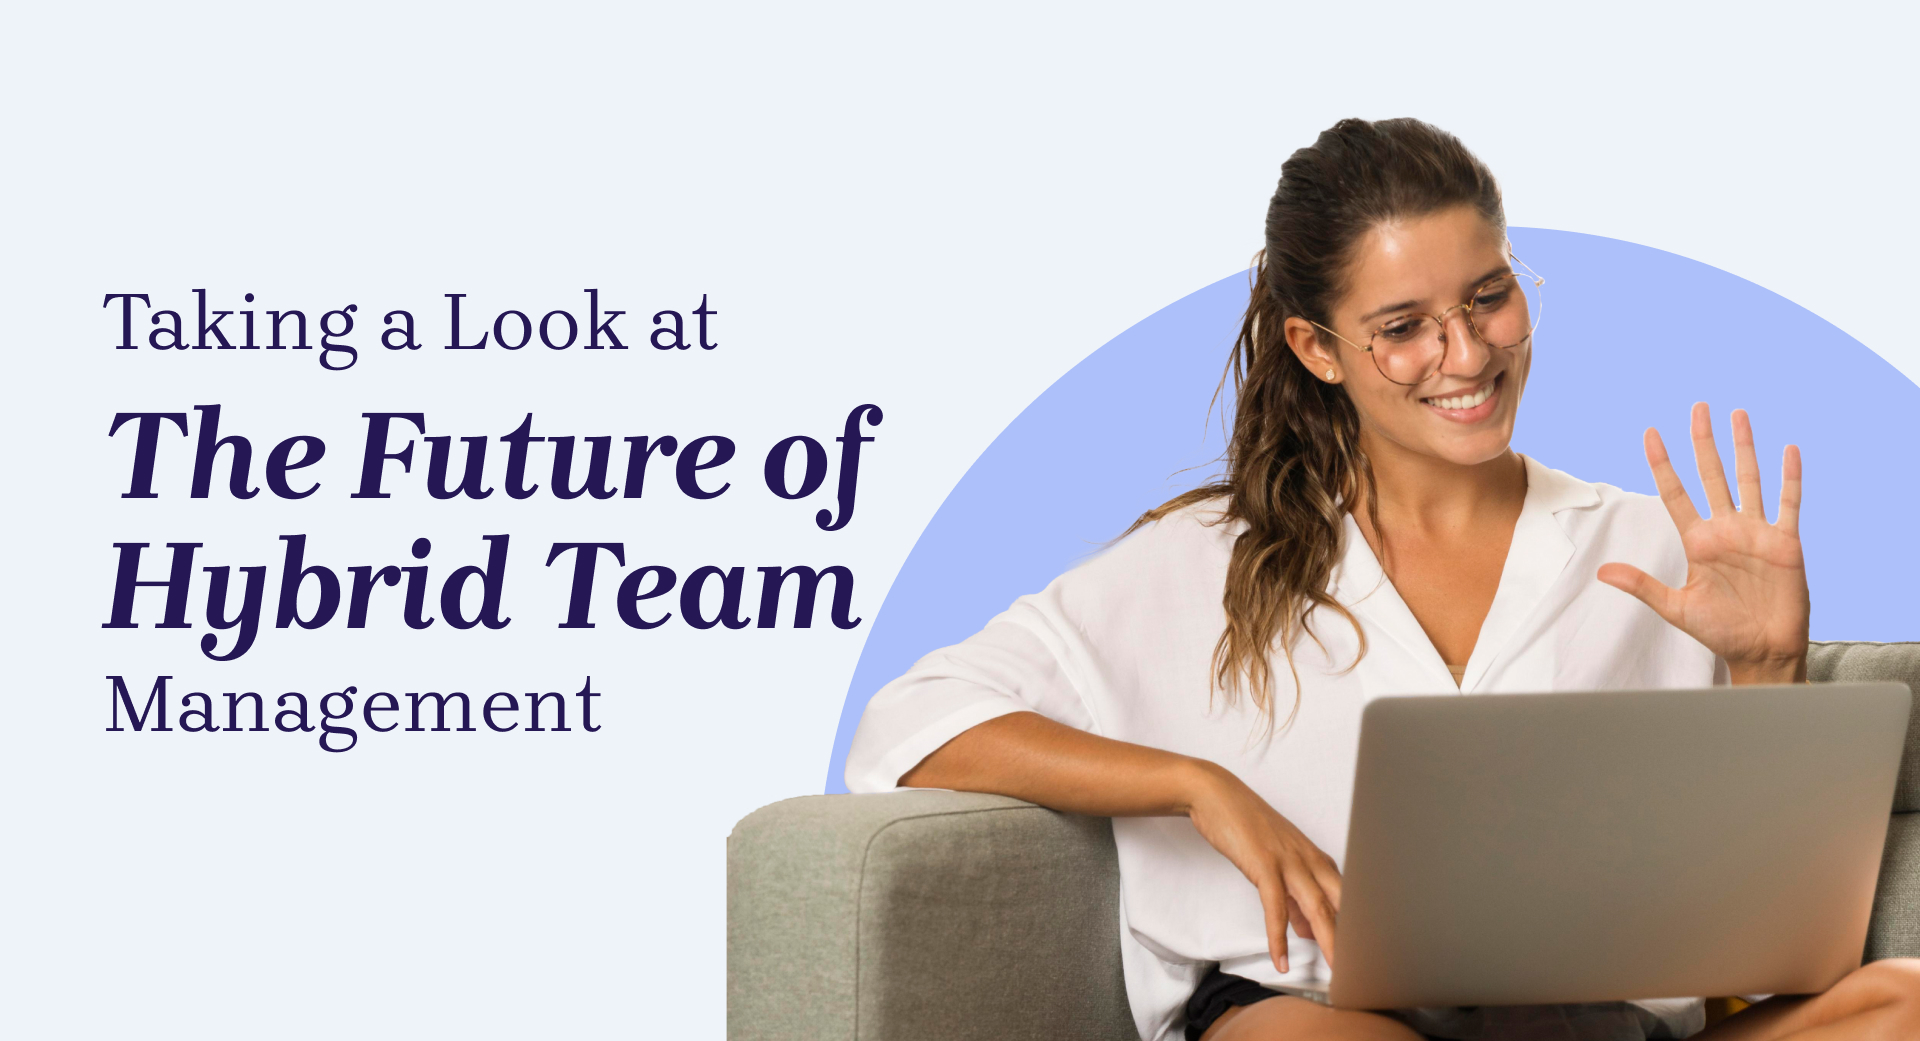 Looking at the Future of Hybrid Team Management